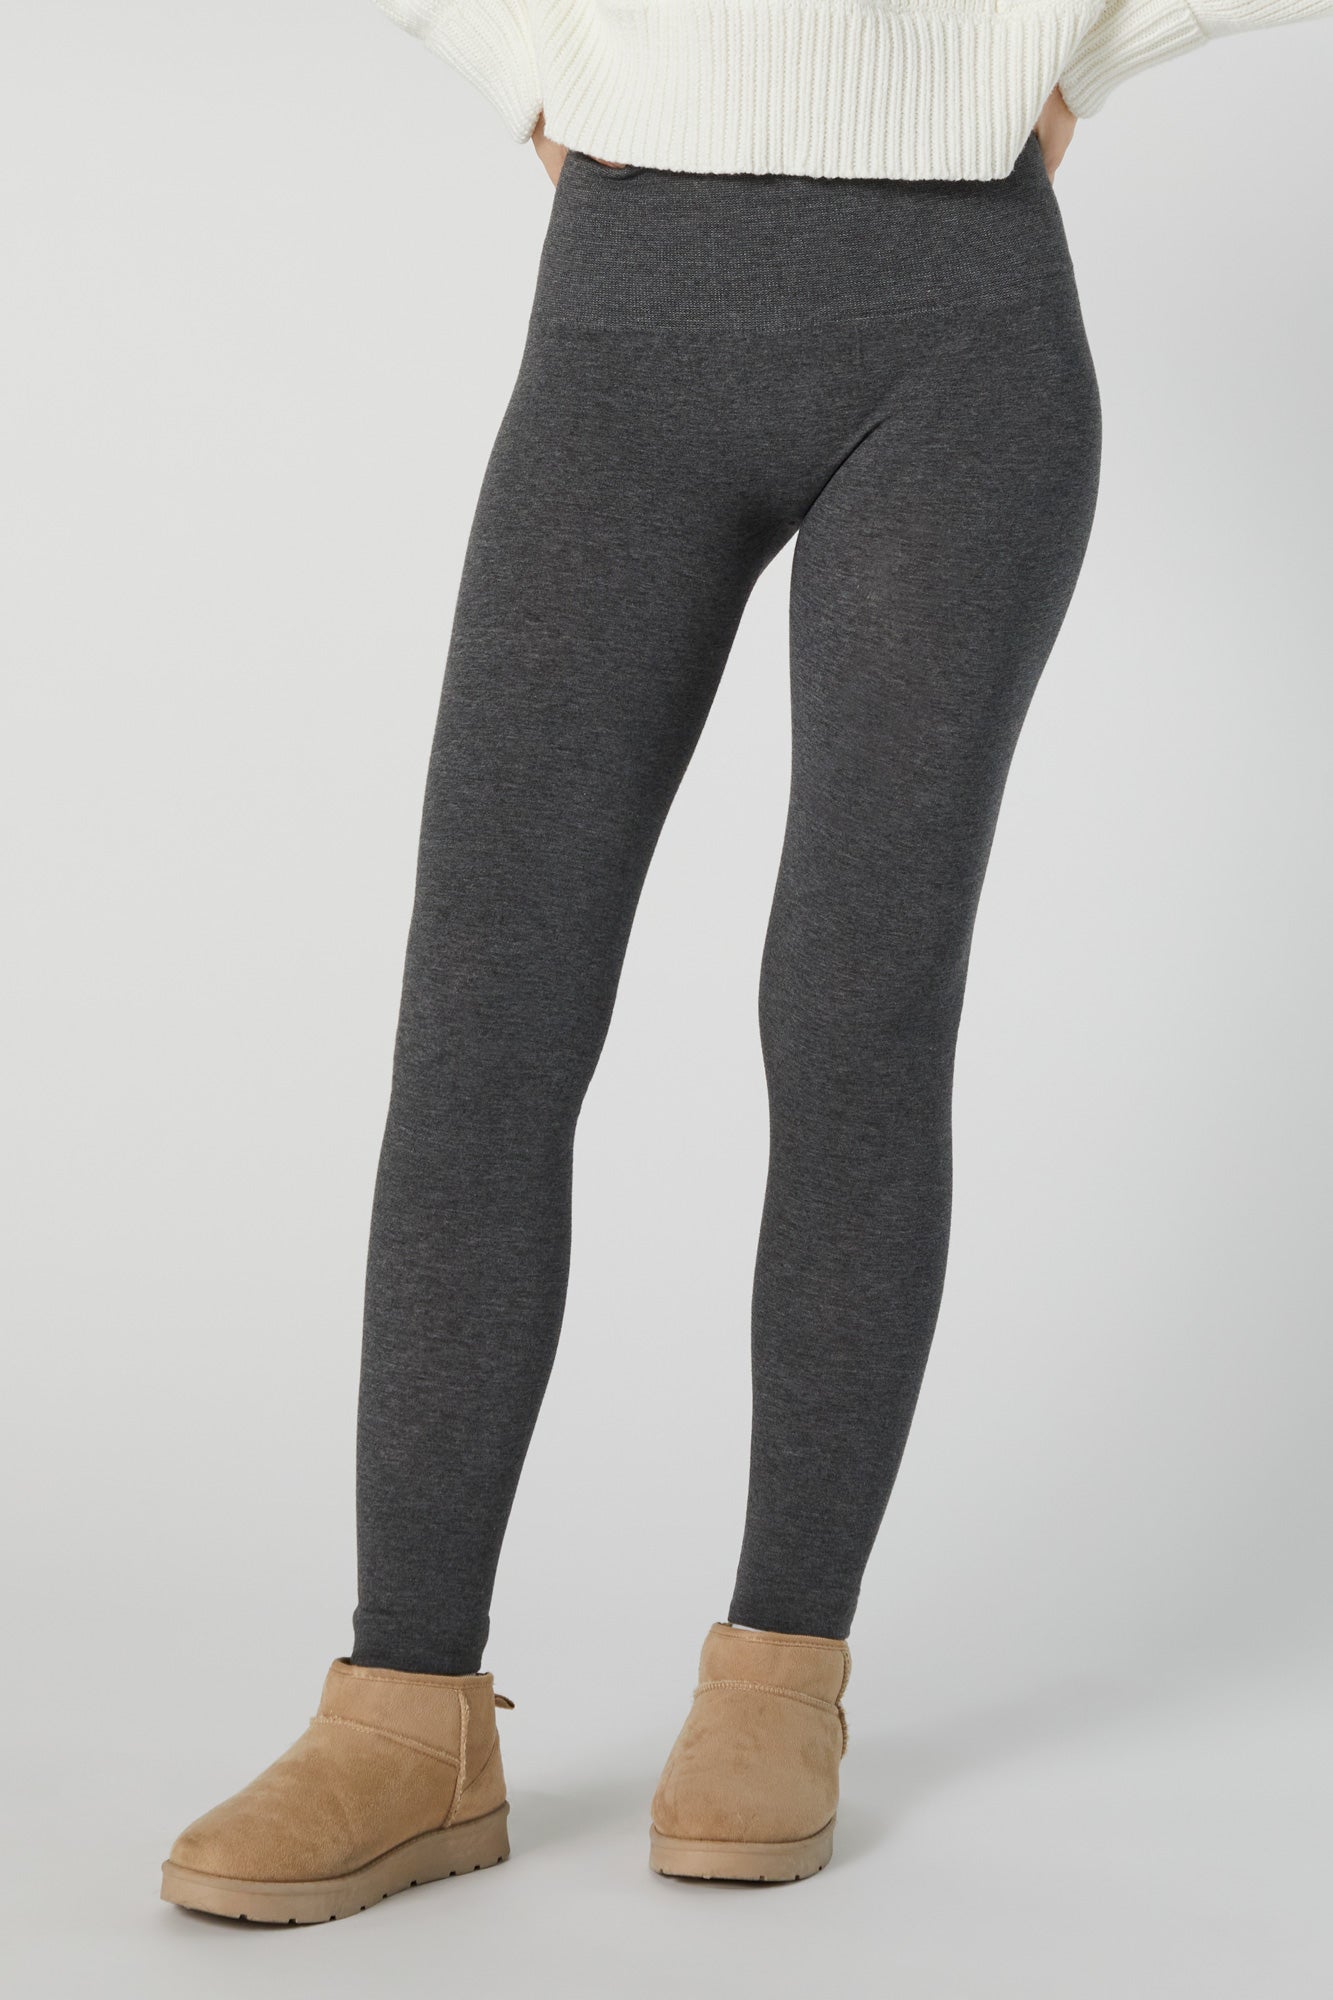 Kmart Fleece Lined Leggings  International Society of Precision Agriculture